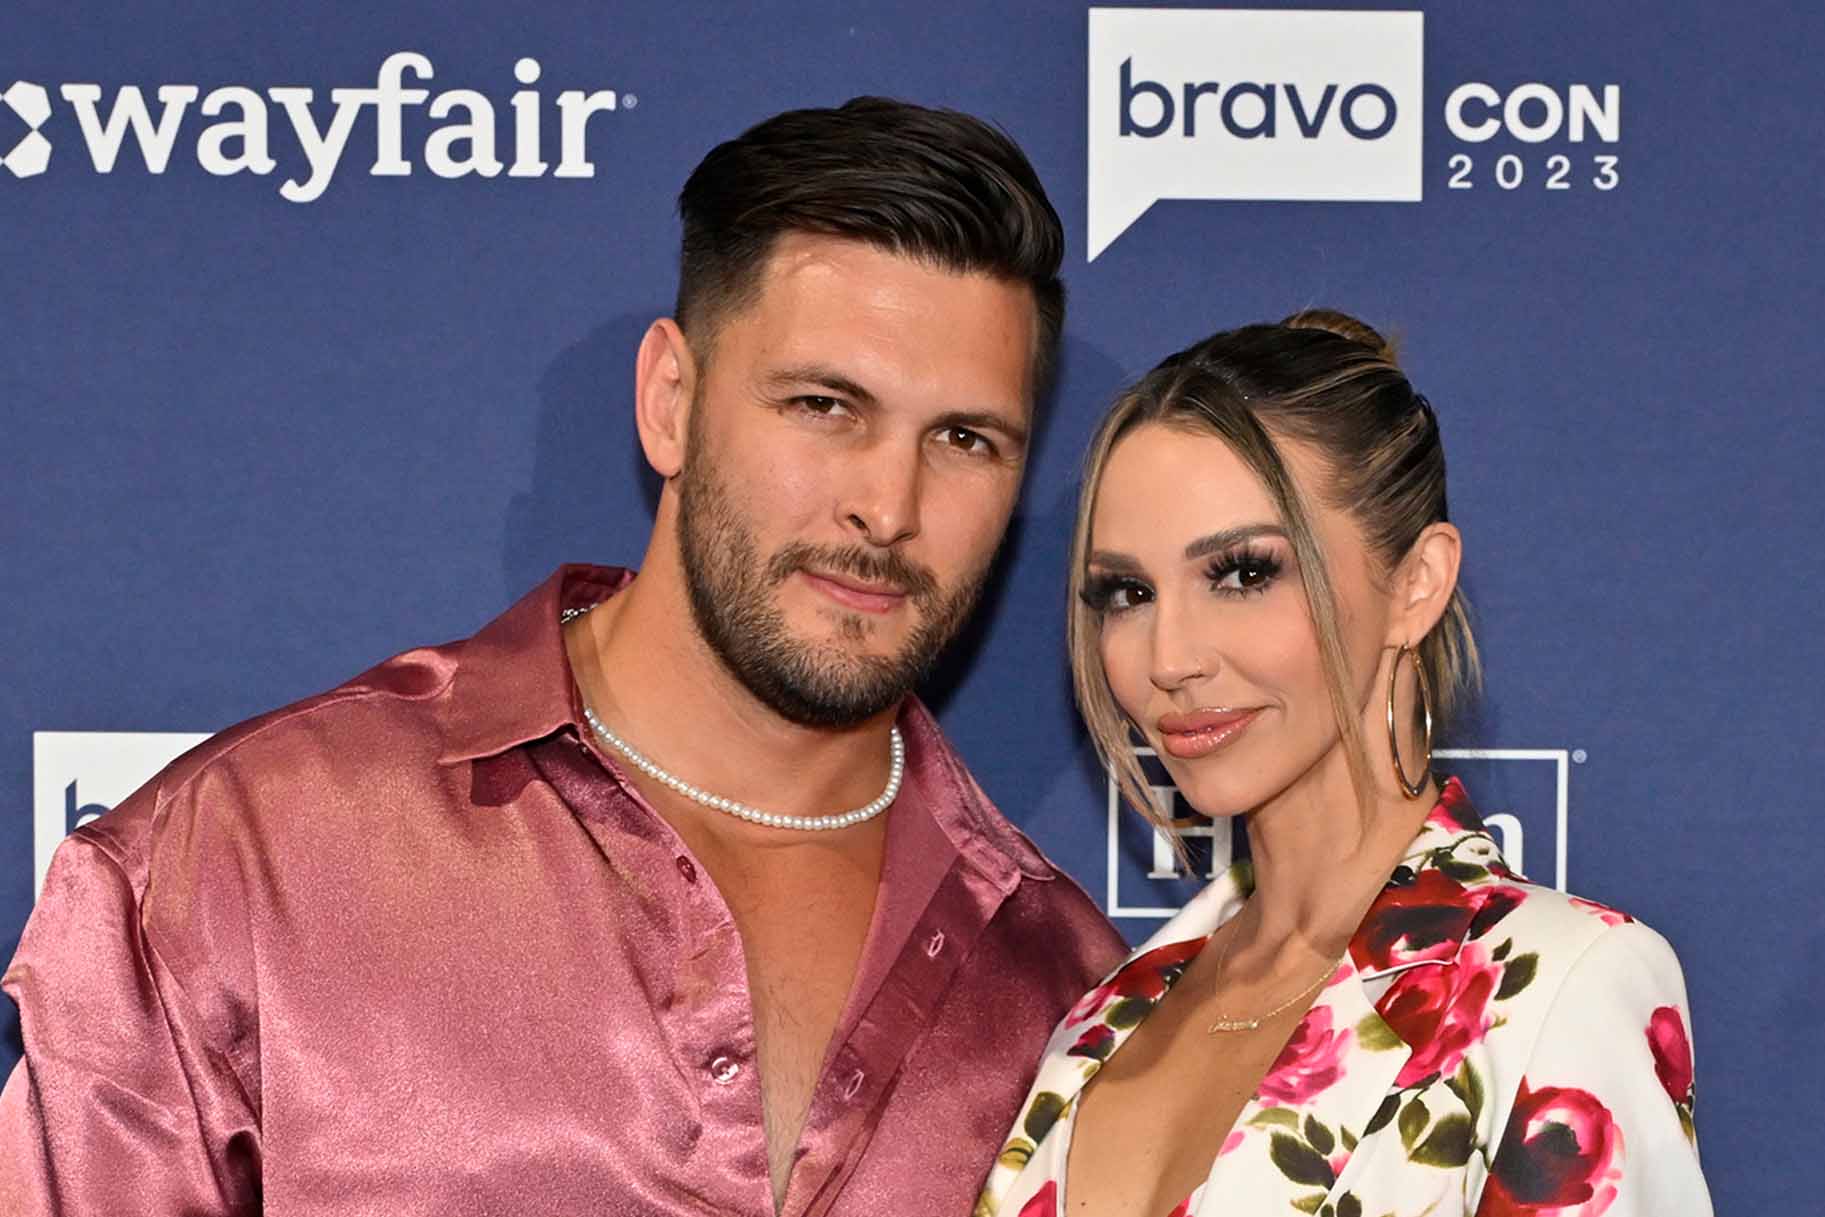 Brock Davies and Scheana Shay pose in coordinating pink outfits.